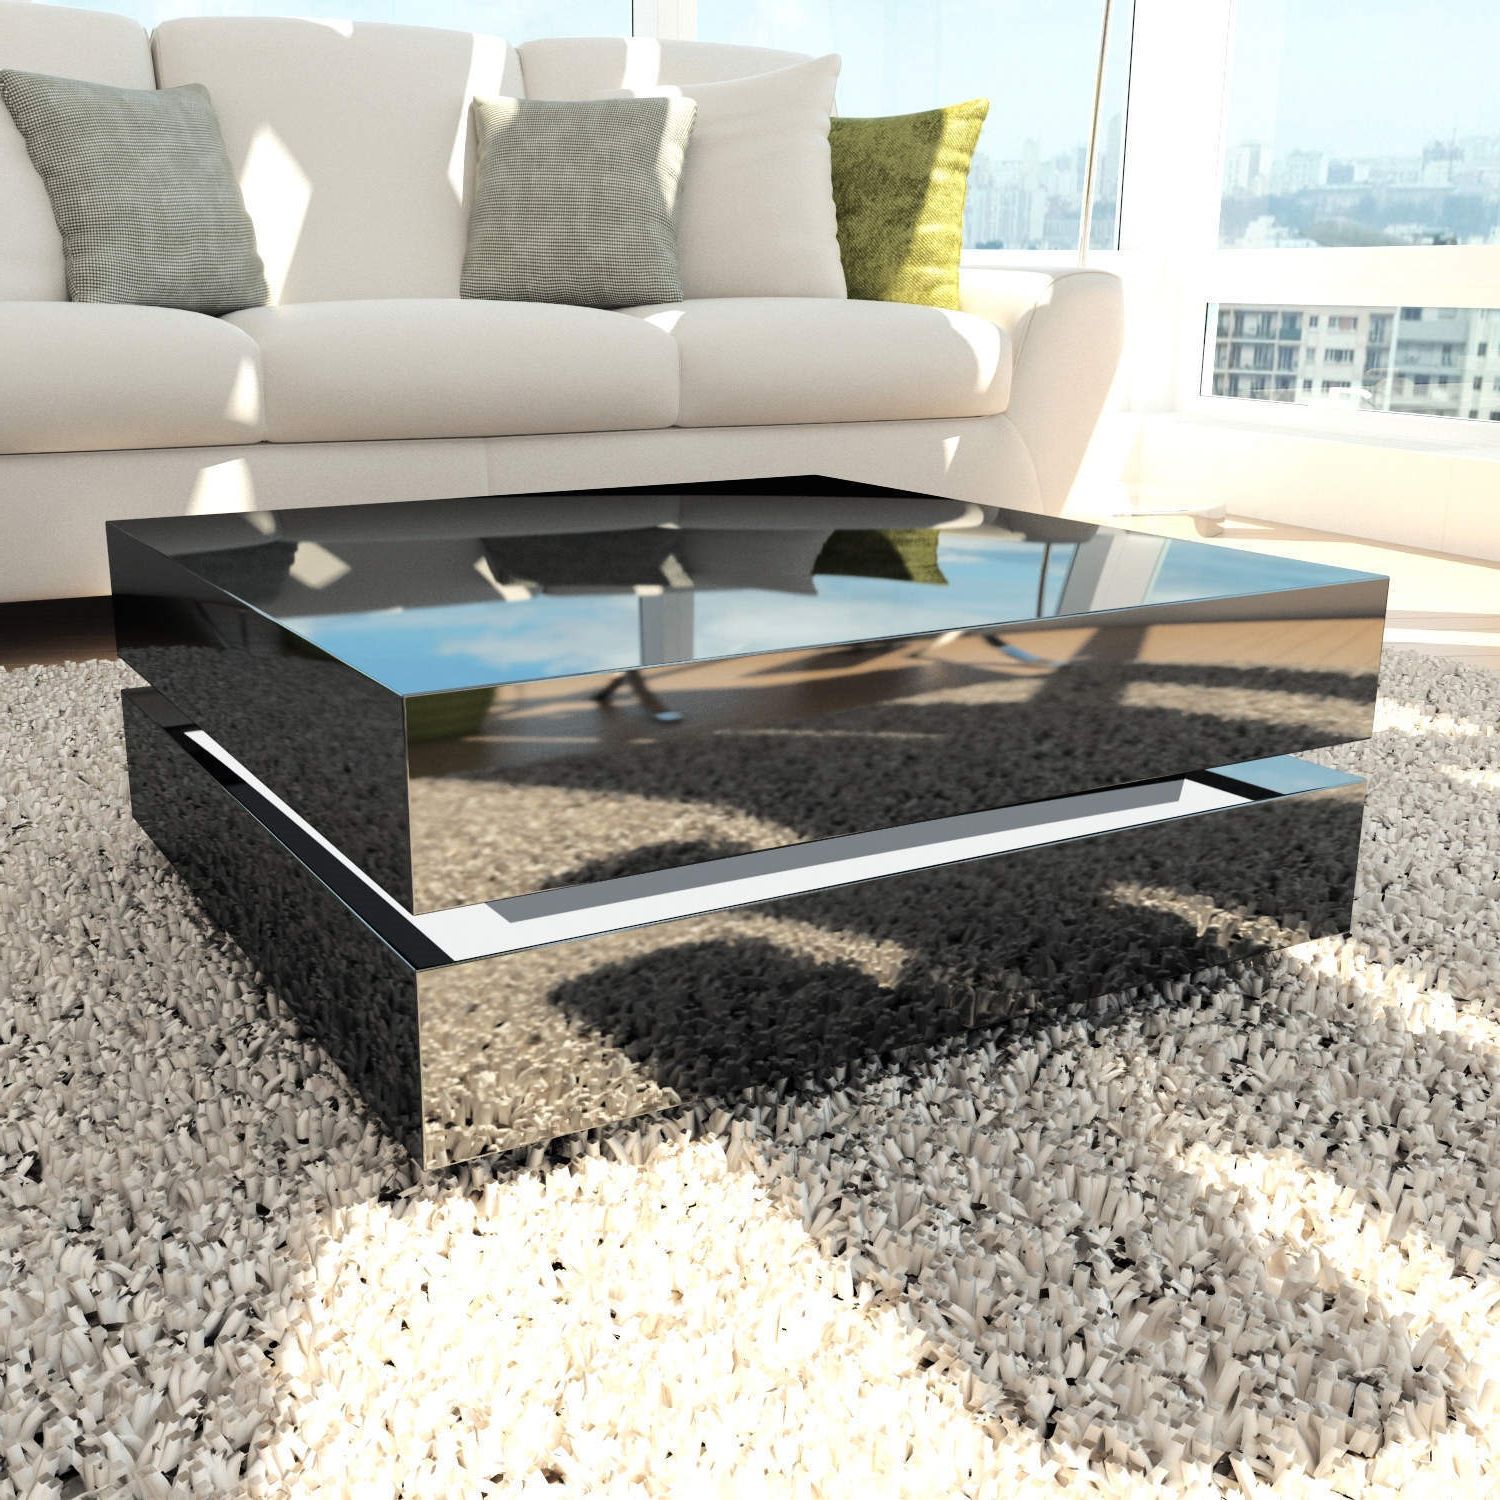 High Gloss Black Coffee Tables Regarding Current Tiffany Black High Gloss Cubic Led Coffee Table – Furniture (View 4 of 15)